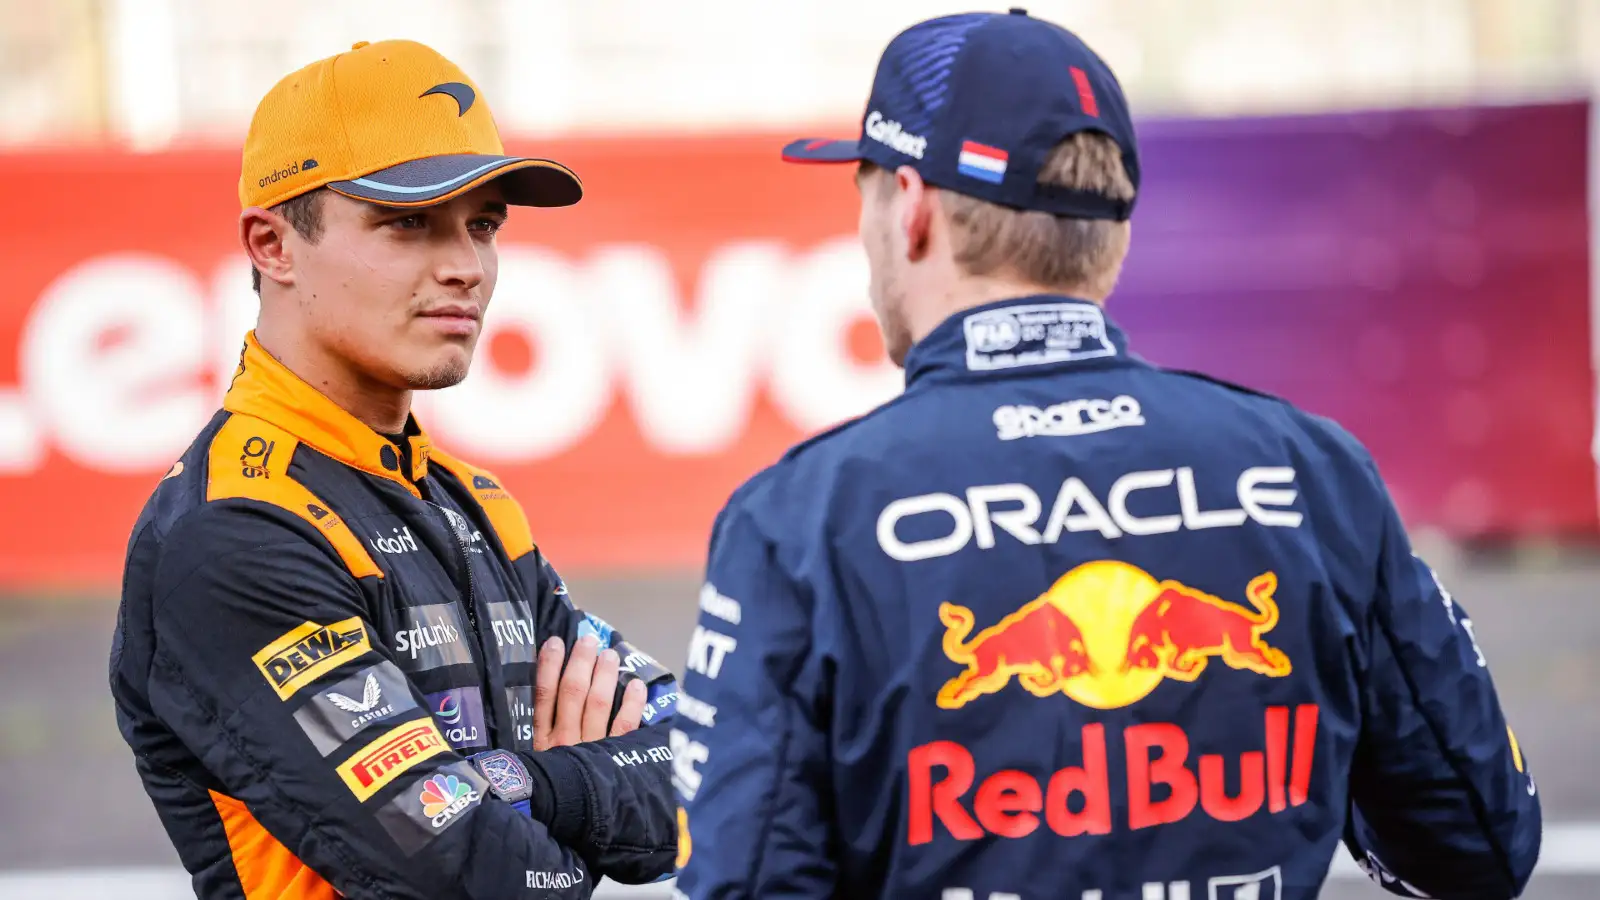 McLaren's Lando Norris chats with Red Bull's Max Verstappen at the Japanese Grand Prix.